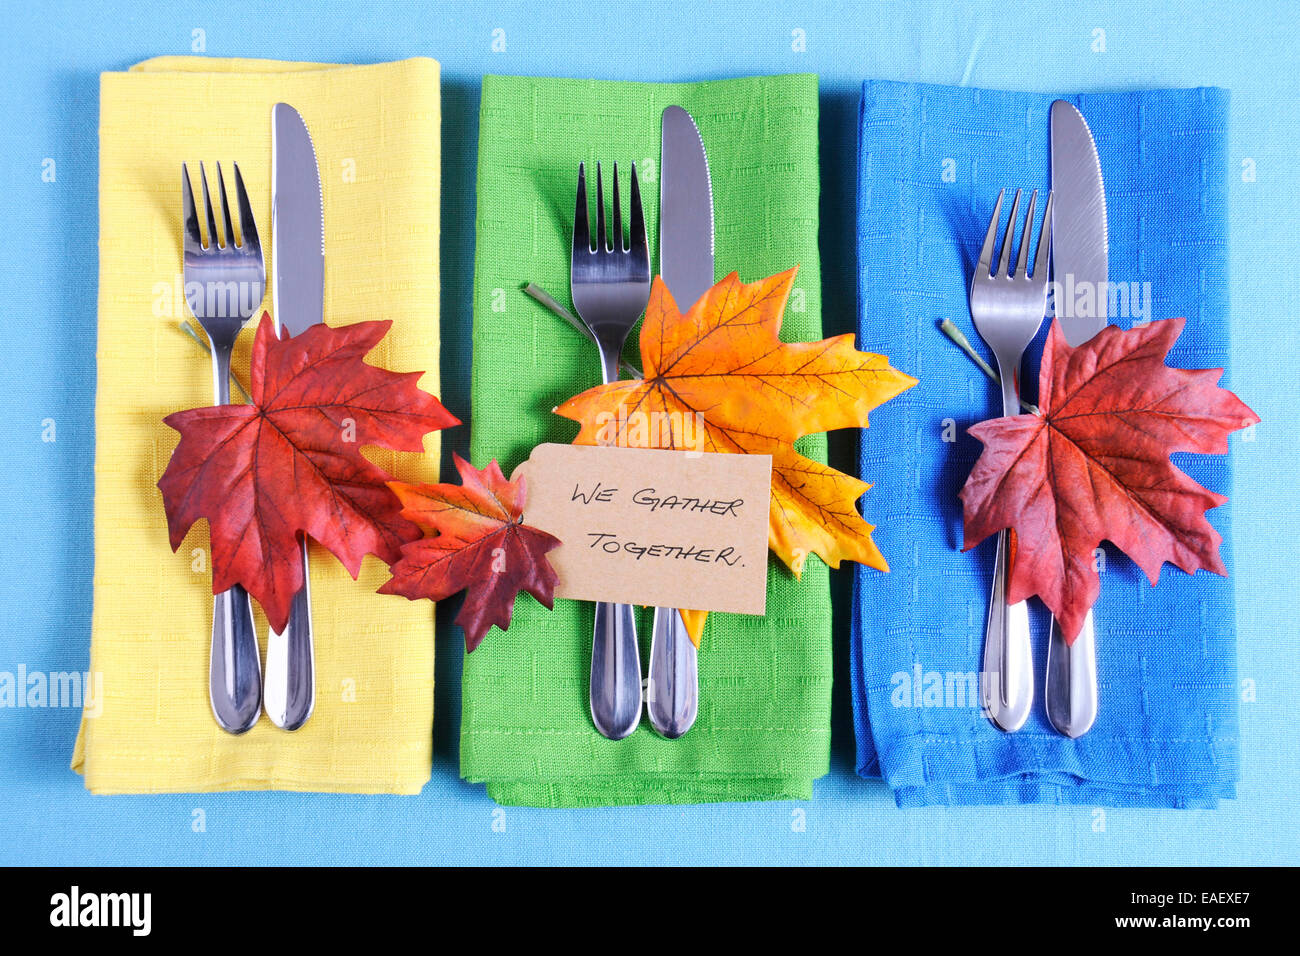 Happy Thanksgiving table place setting with We Gather Together place card and autumn fall leaf decorations Stock Photo